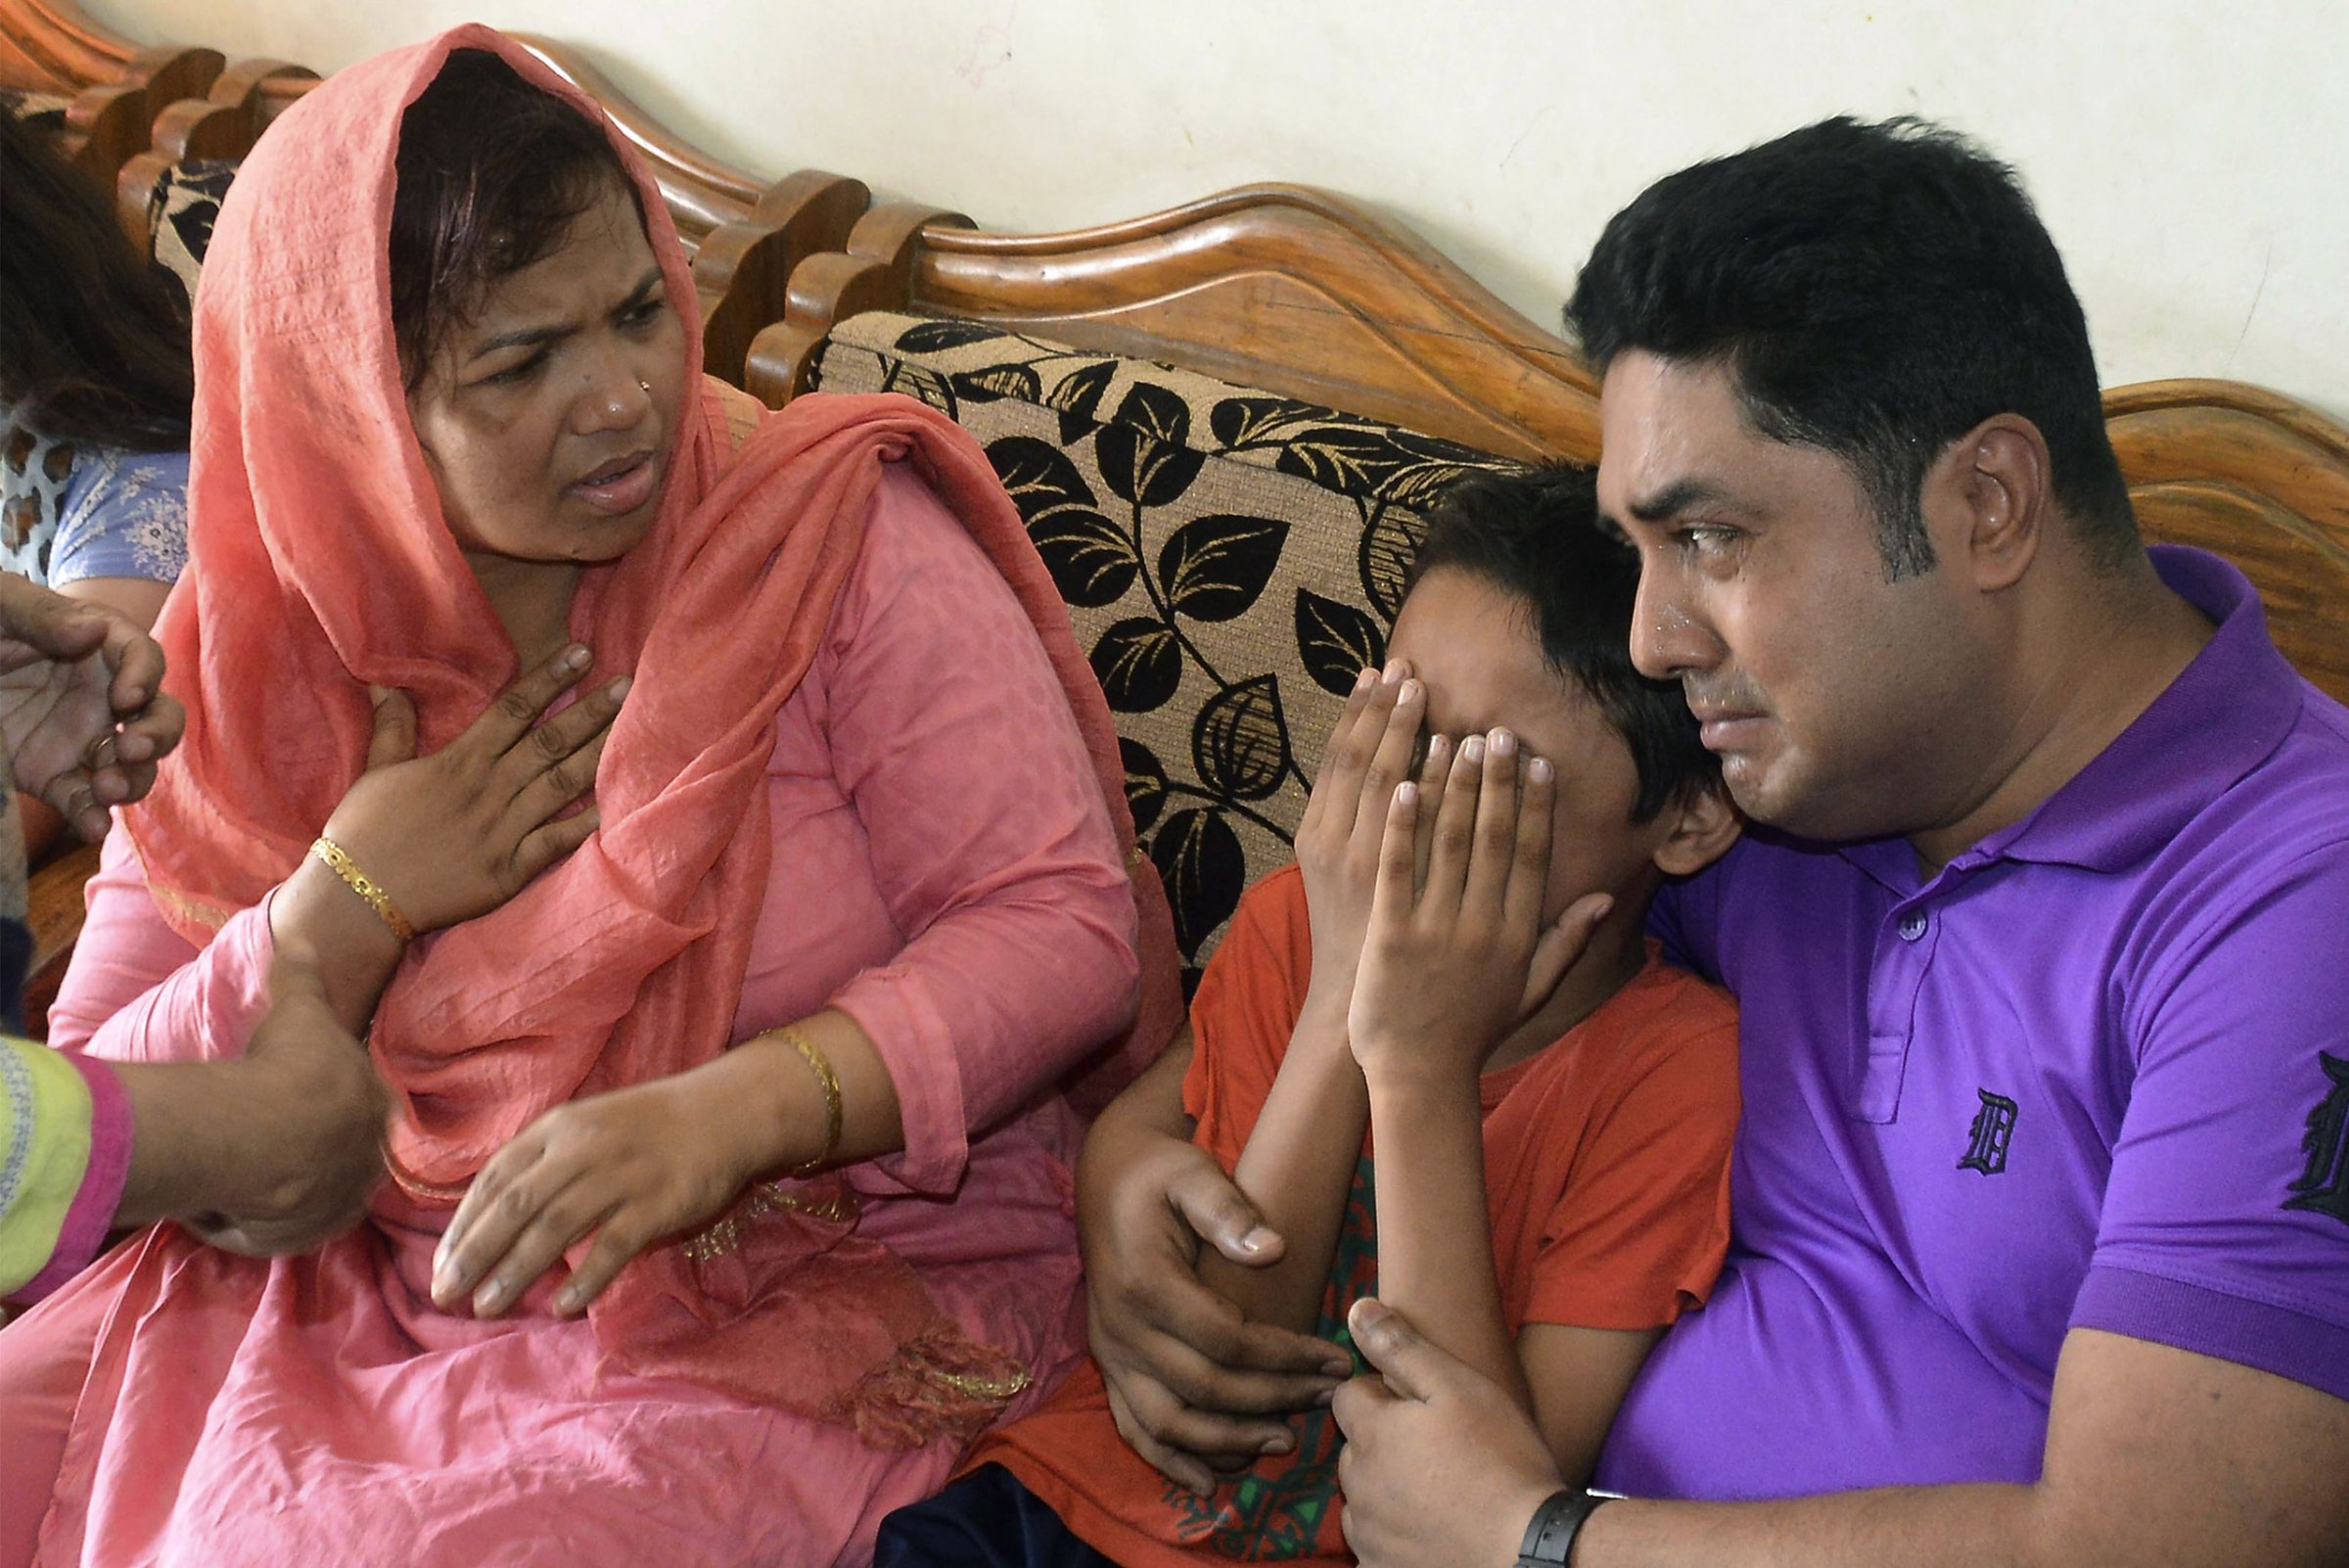 The young son of Mahmuda Aktar, the wife of a top Bangladeshi anti-terror officer, mourns after she was shot dead near her home in Chittagong on June 5, 2016. The wife of a top anti-terror officer was murdered in the southeastern city of Chittagong by suspected members of a banned local extremist group. / AFP / - (Photo credit should read -/AFP/Getty Images)